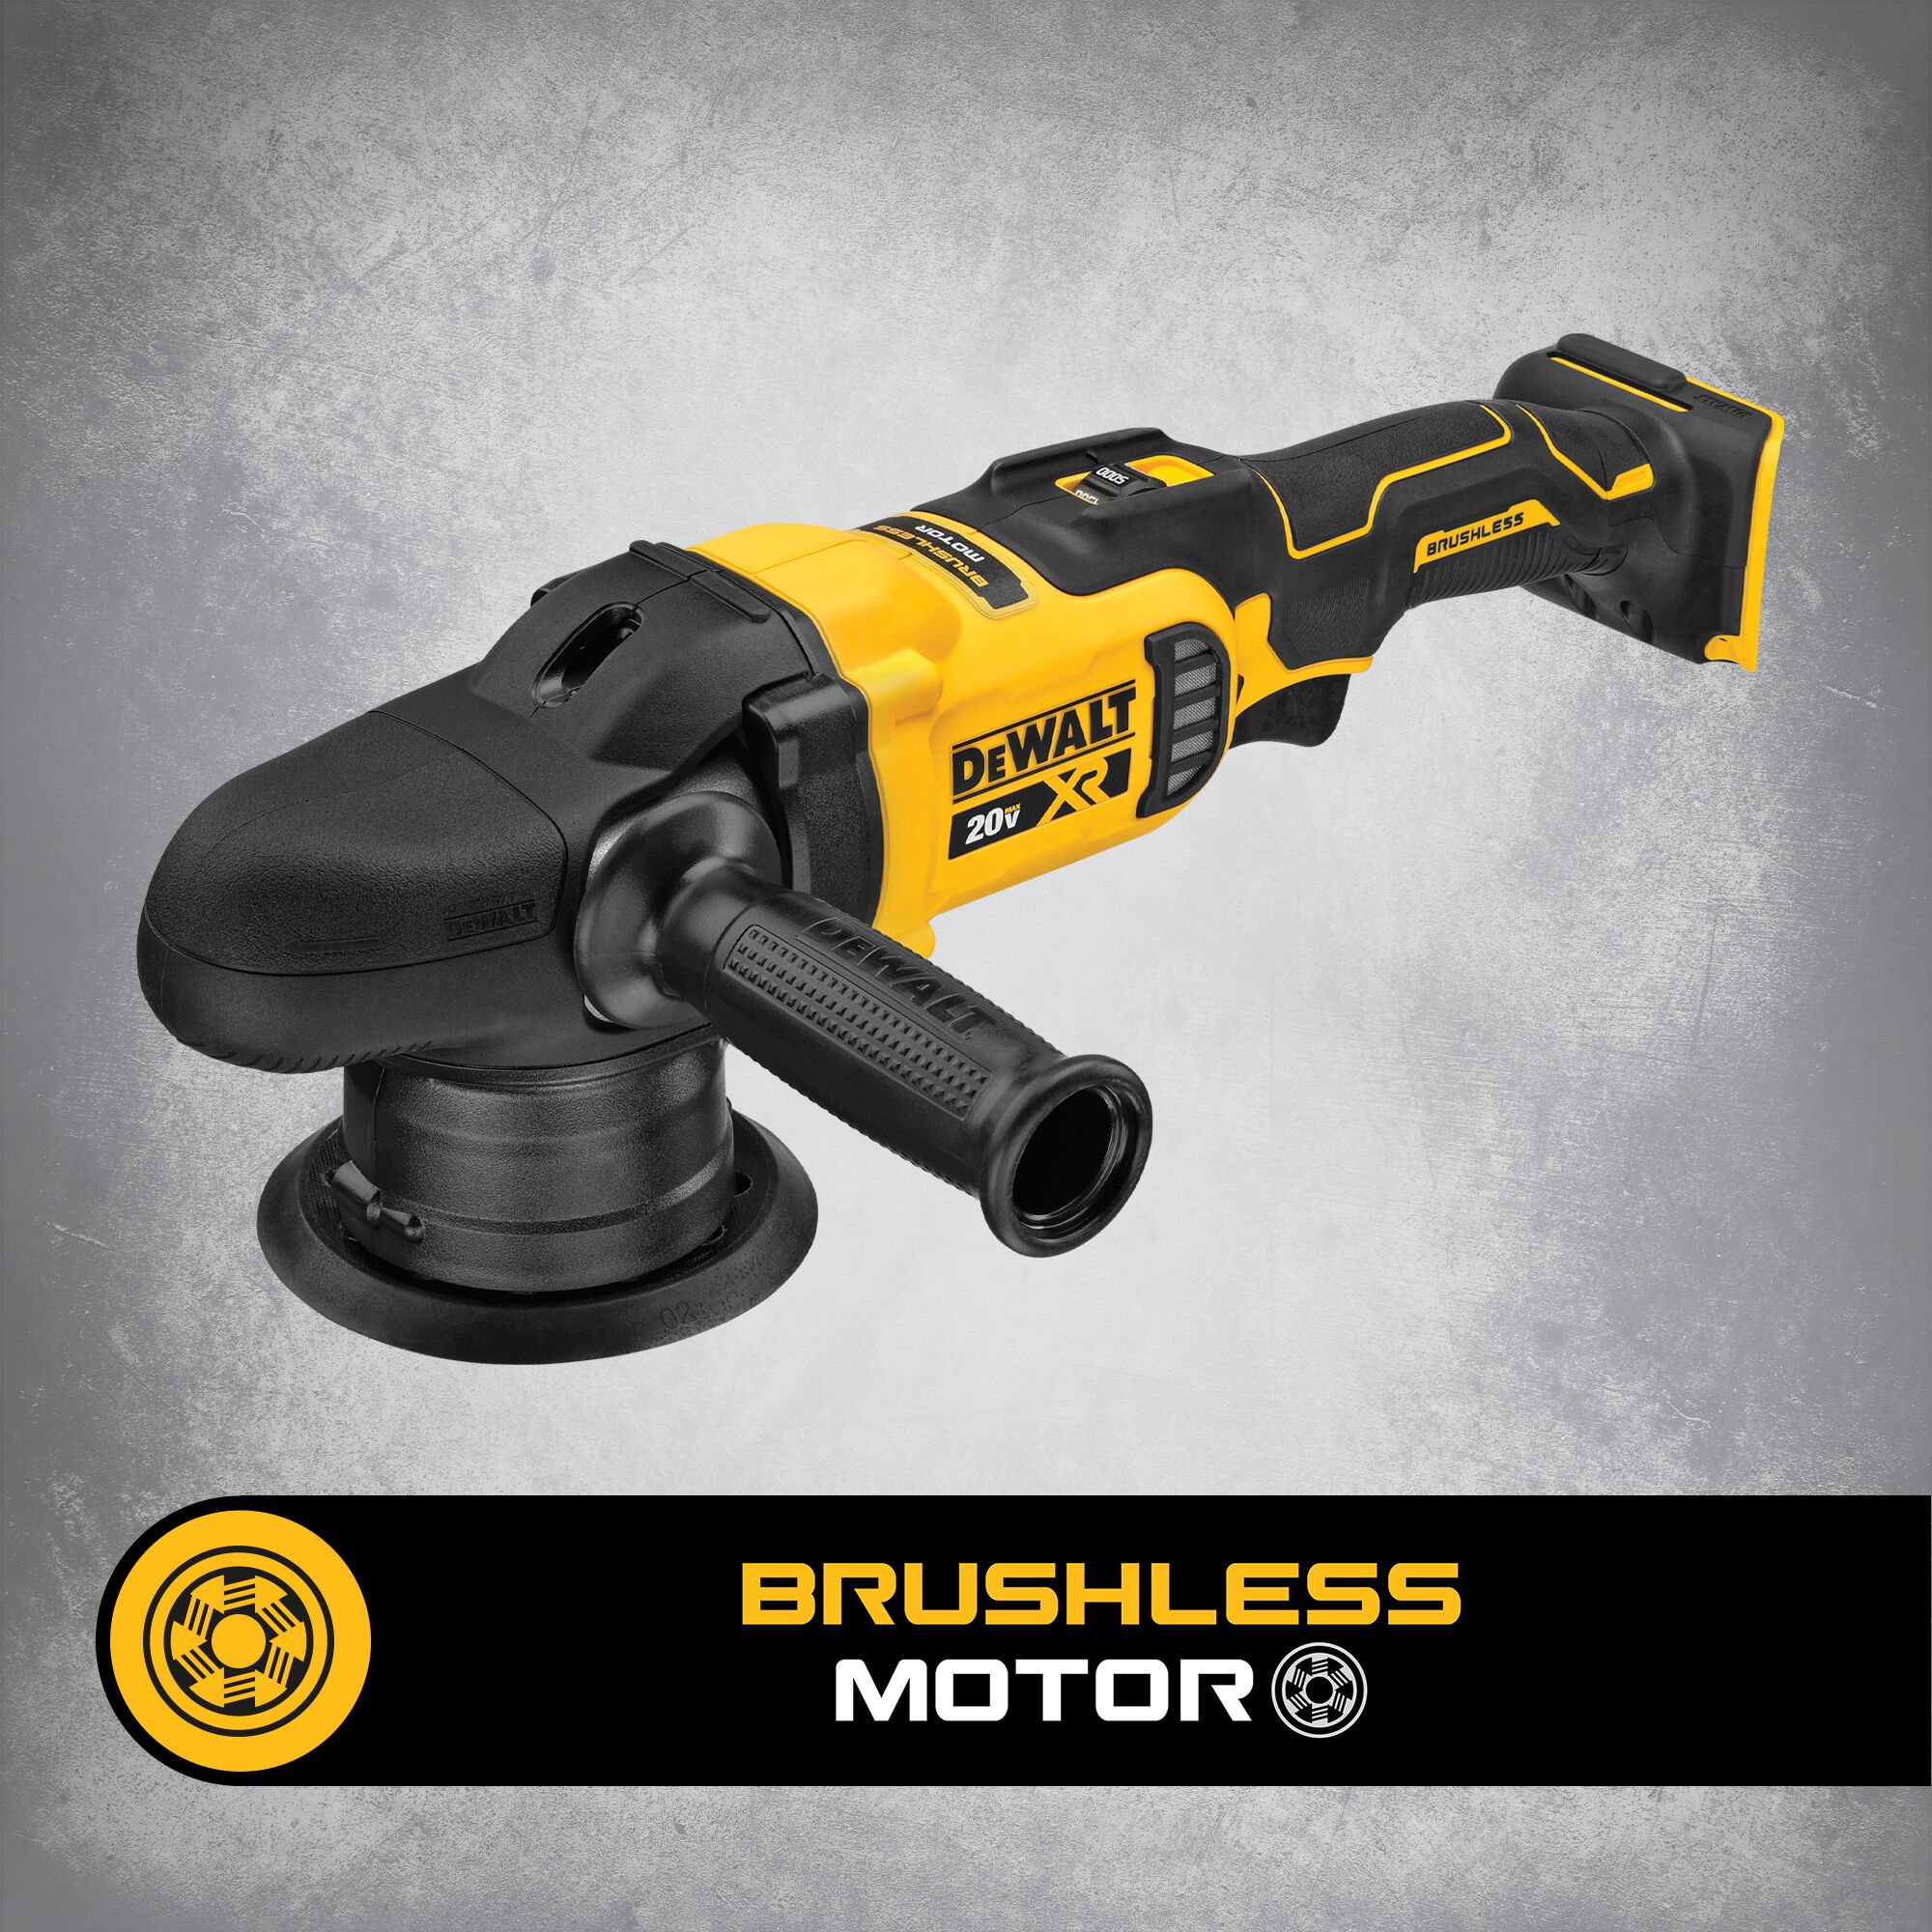 Cordless Buffer Polisher Compatible with DEWALT 20V Max Battery,  5000-10000RPM Variable Speed Brushless Motor Car Buffer, Lightweight,  Rotary Polisher for Boat, Car Polishing and Waxing (Tool Only) 